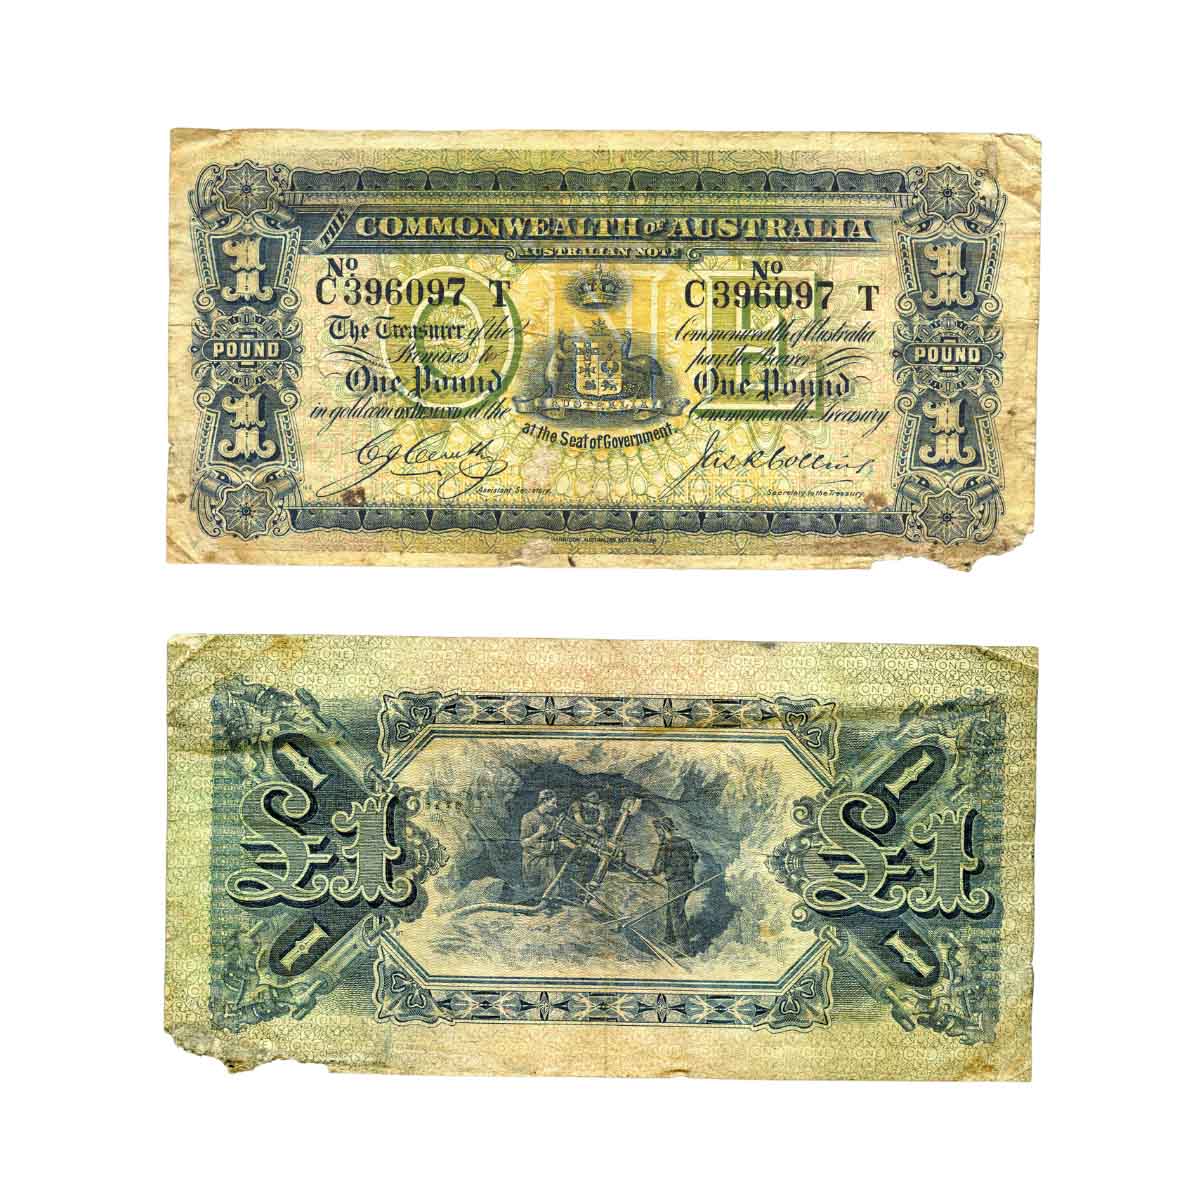 1918 £1 R21 Cerutty/Collins Banknote Fair-Fine with faults